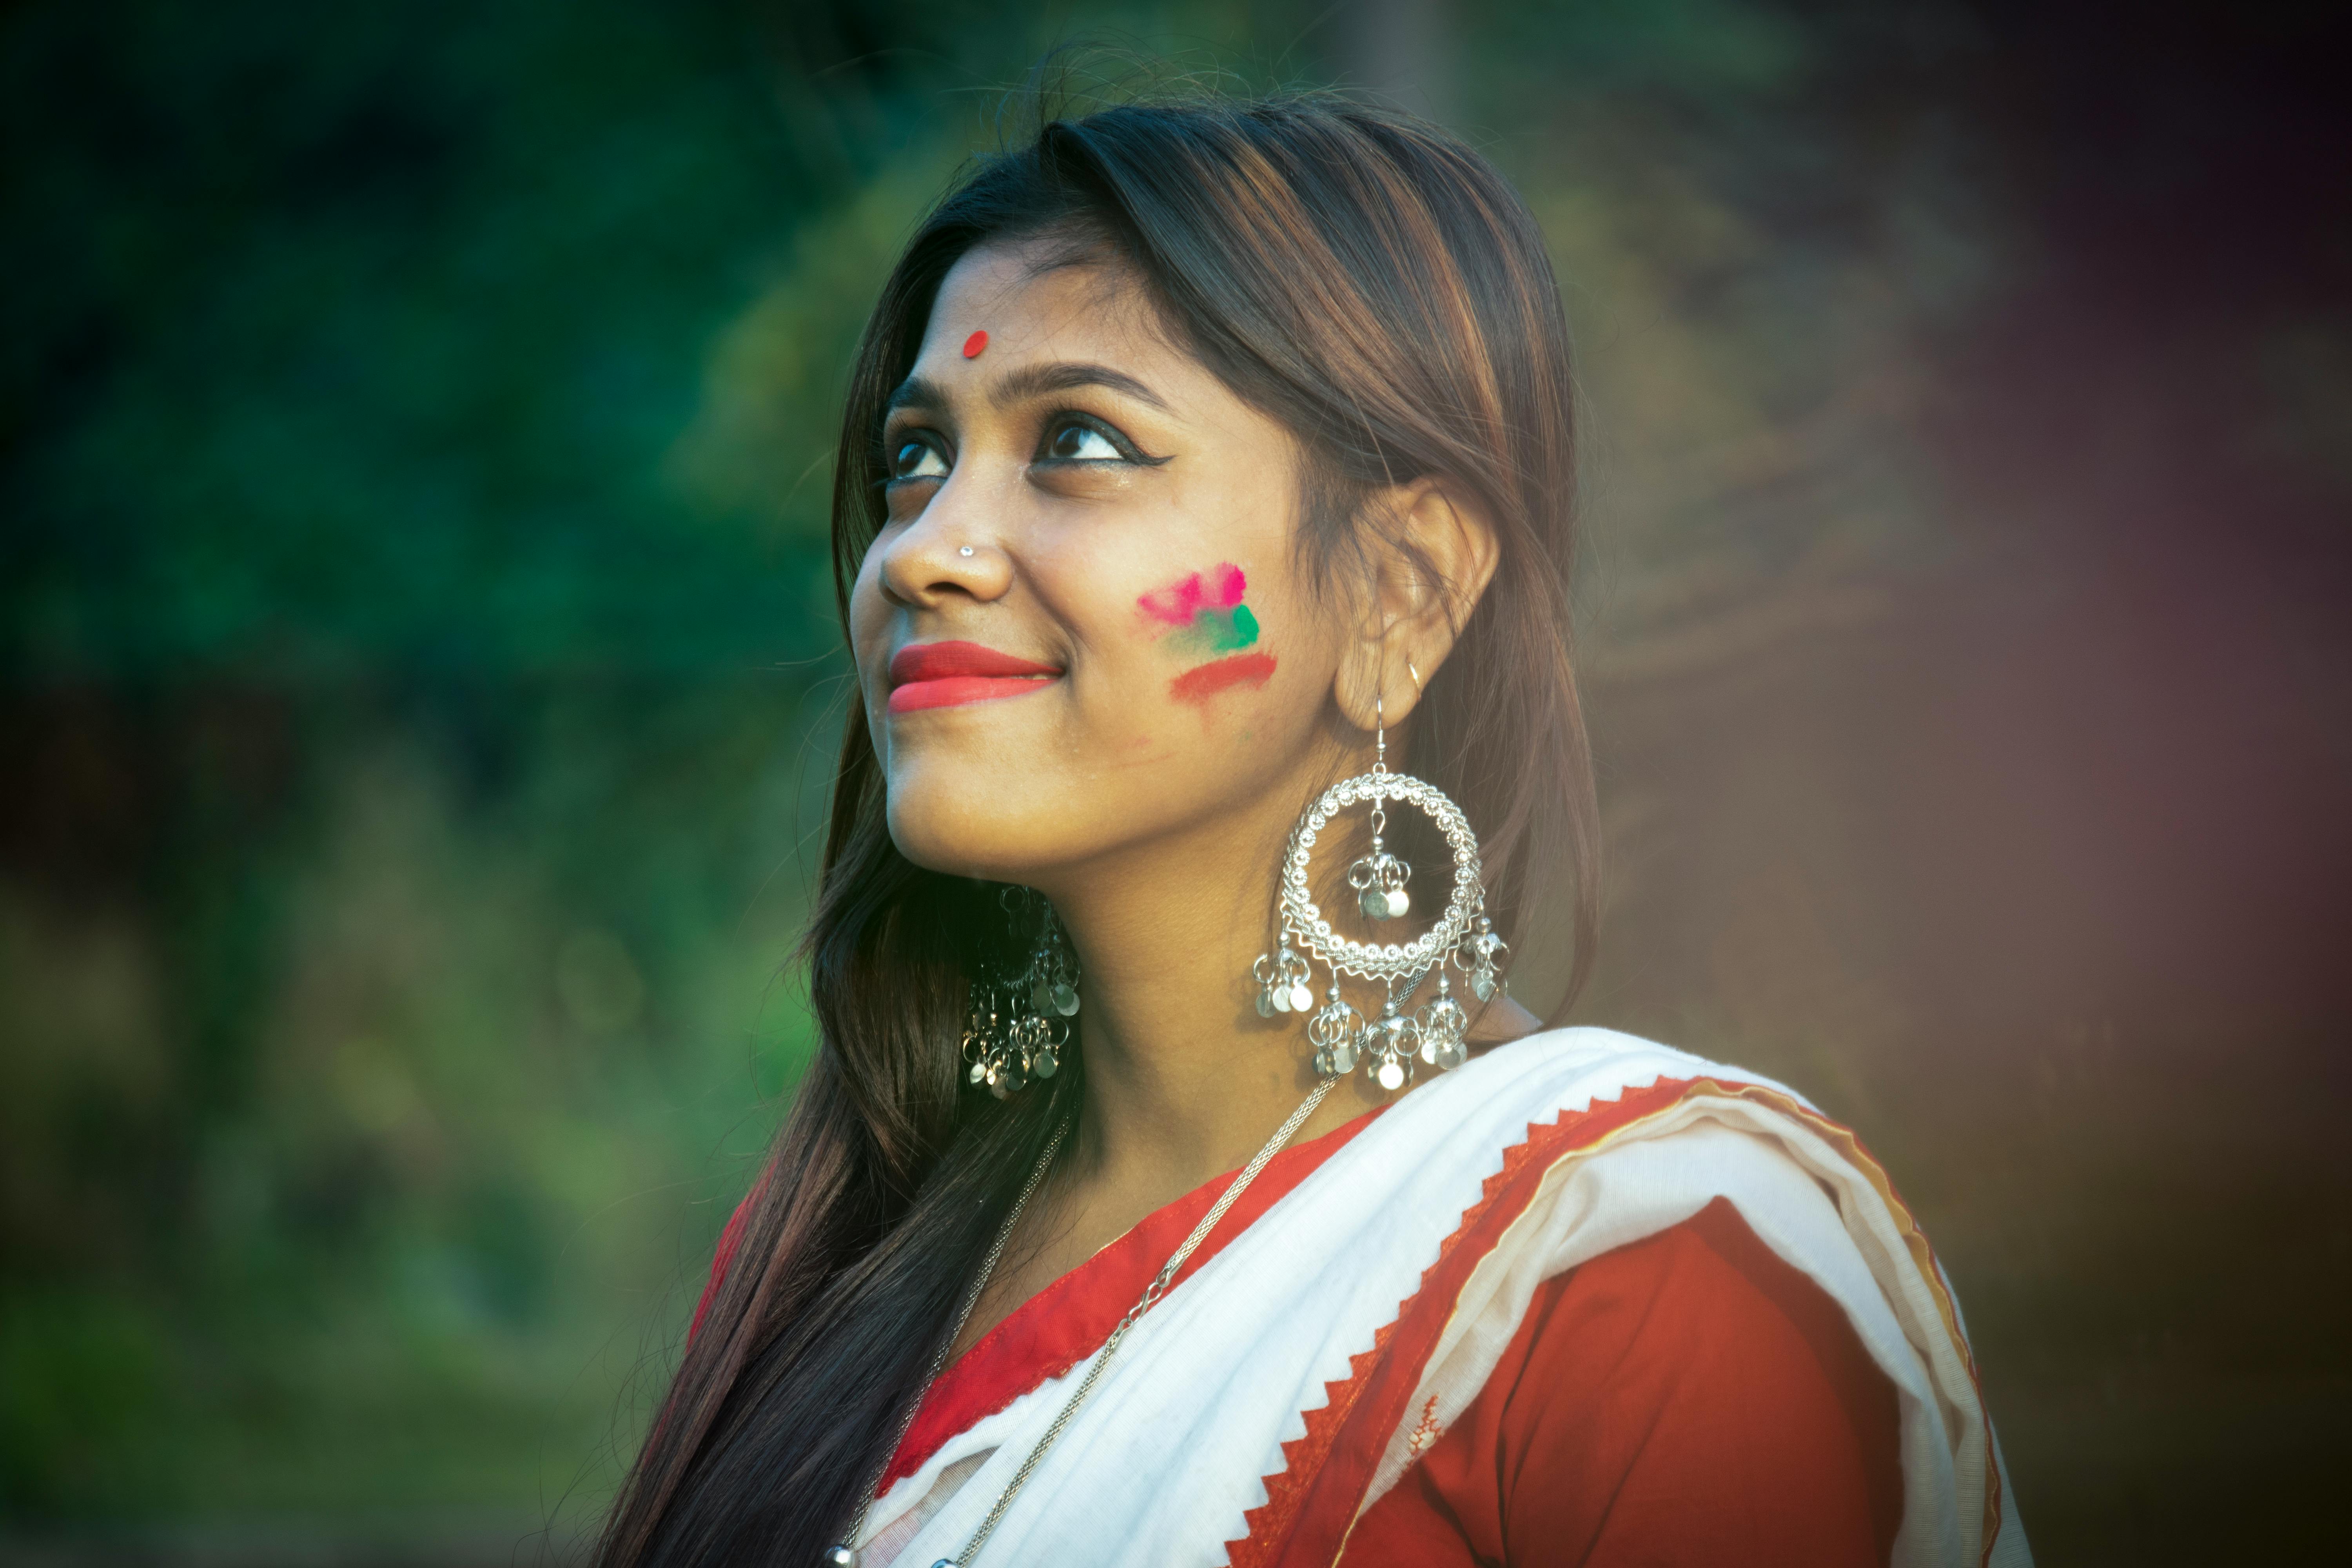 Portrait Of A Beautiful Smiling Indian Woman Wearing Saree And